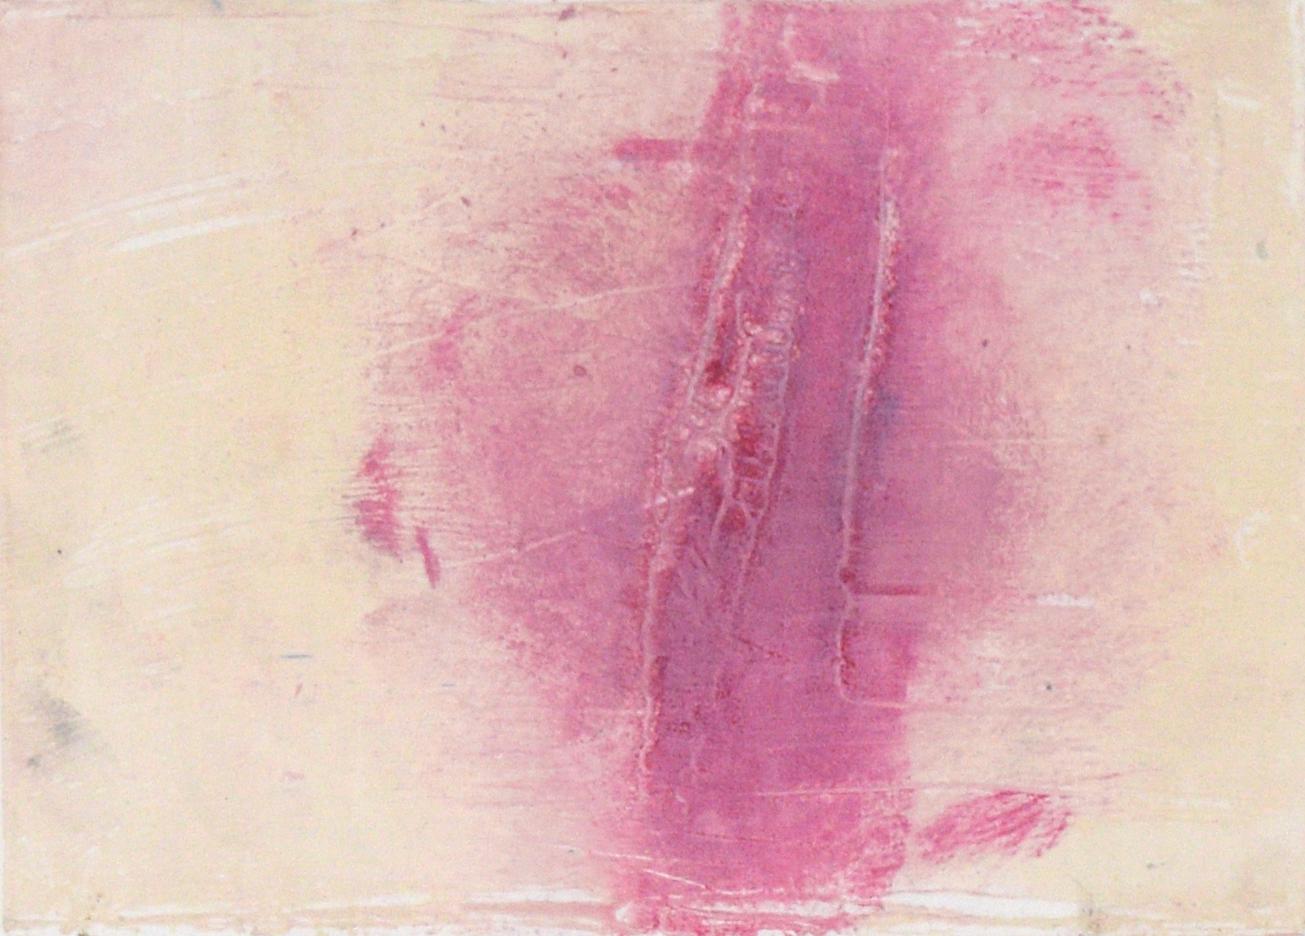 Pink on Yellow - Textured Transfer Monotype in Oil on Paper - Print by Heather Speck